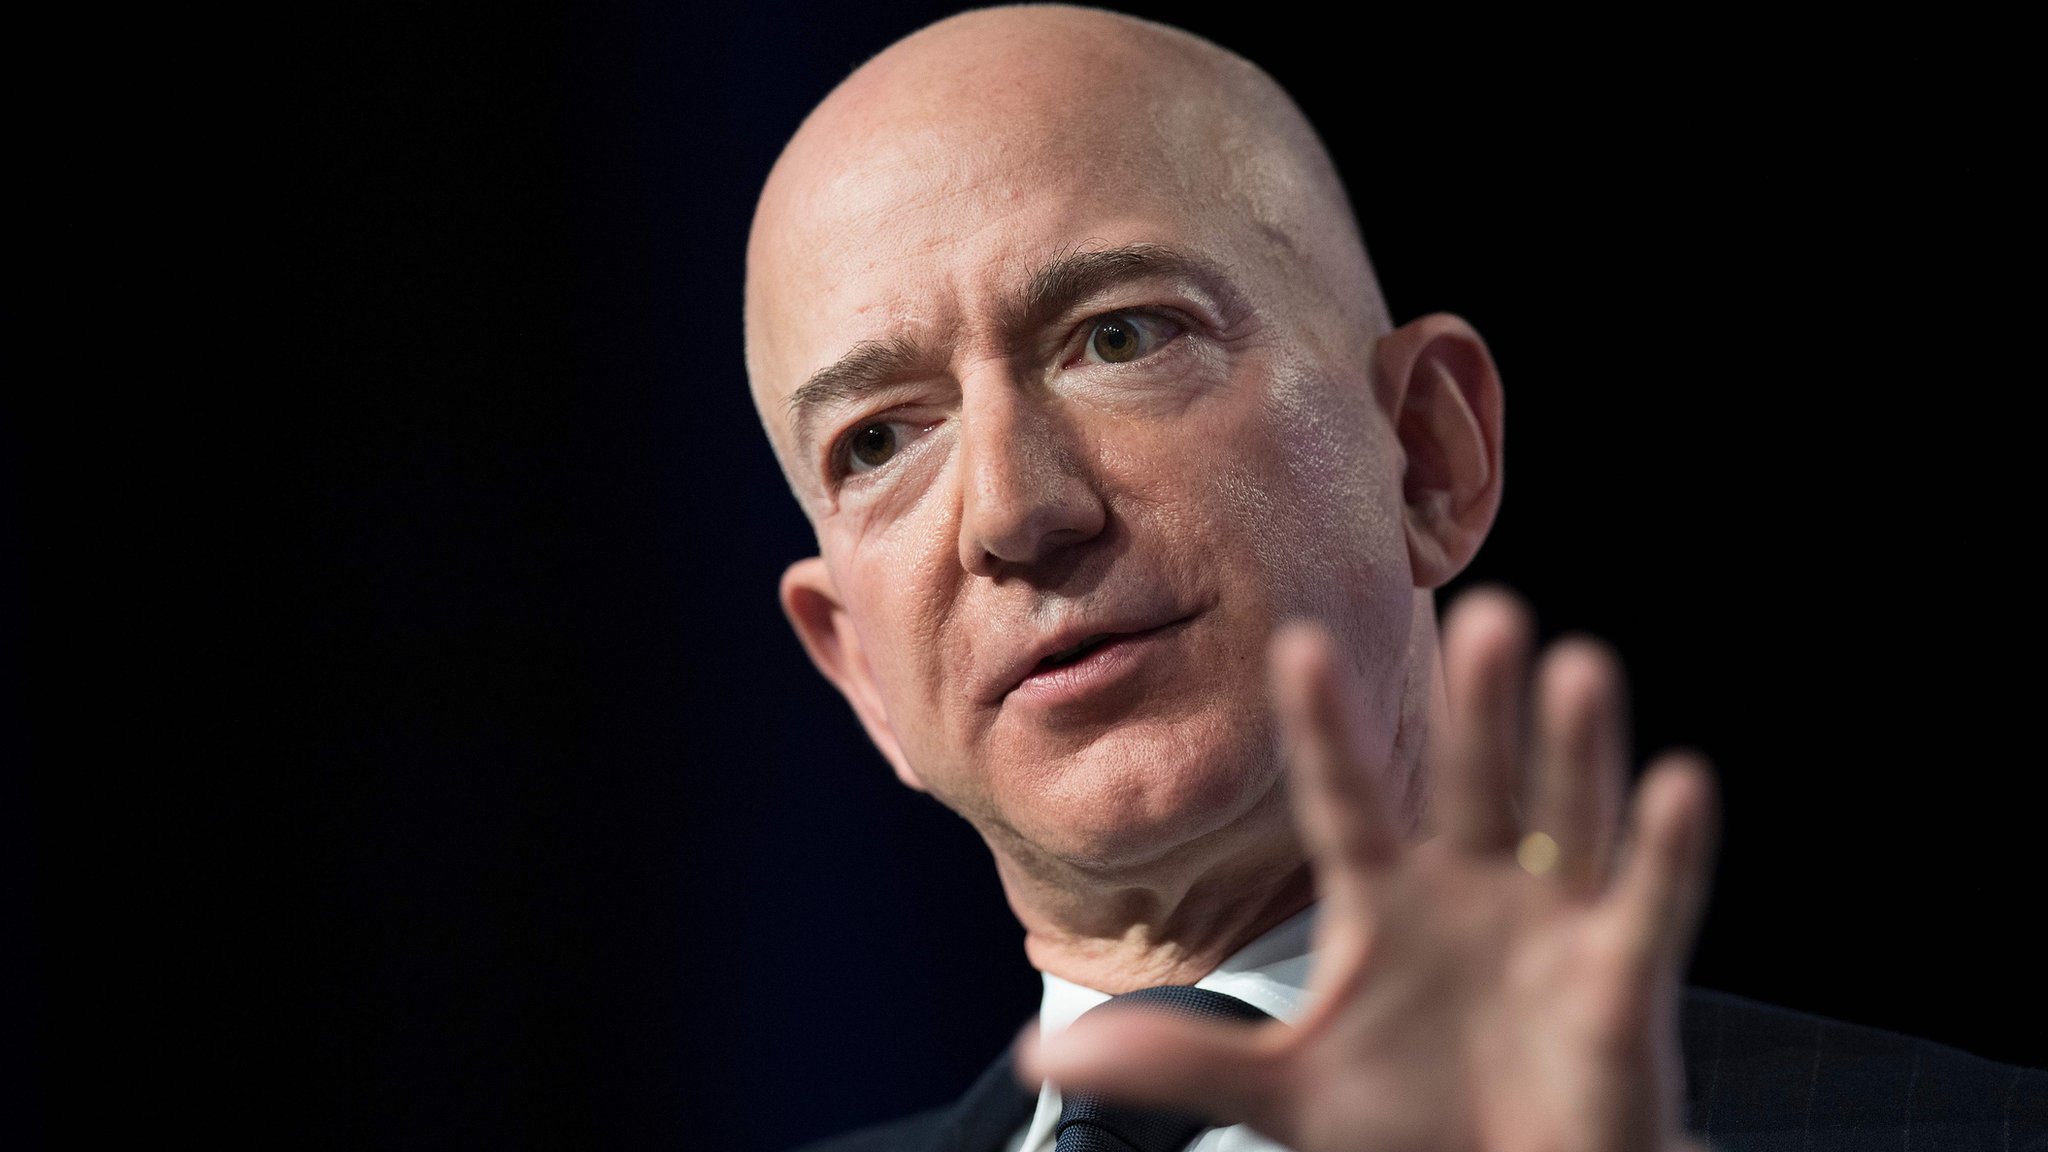 Jeff Bezos Amazon boss accuses National Enquirer of blackmail